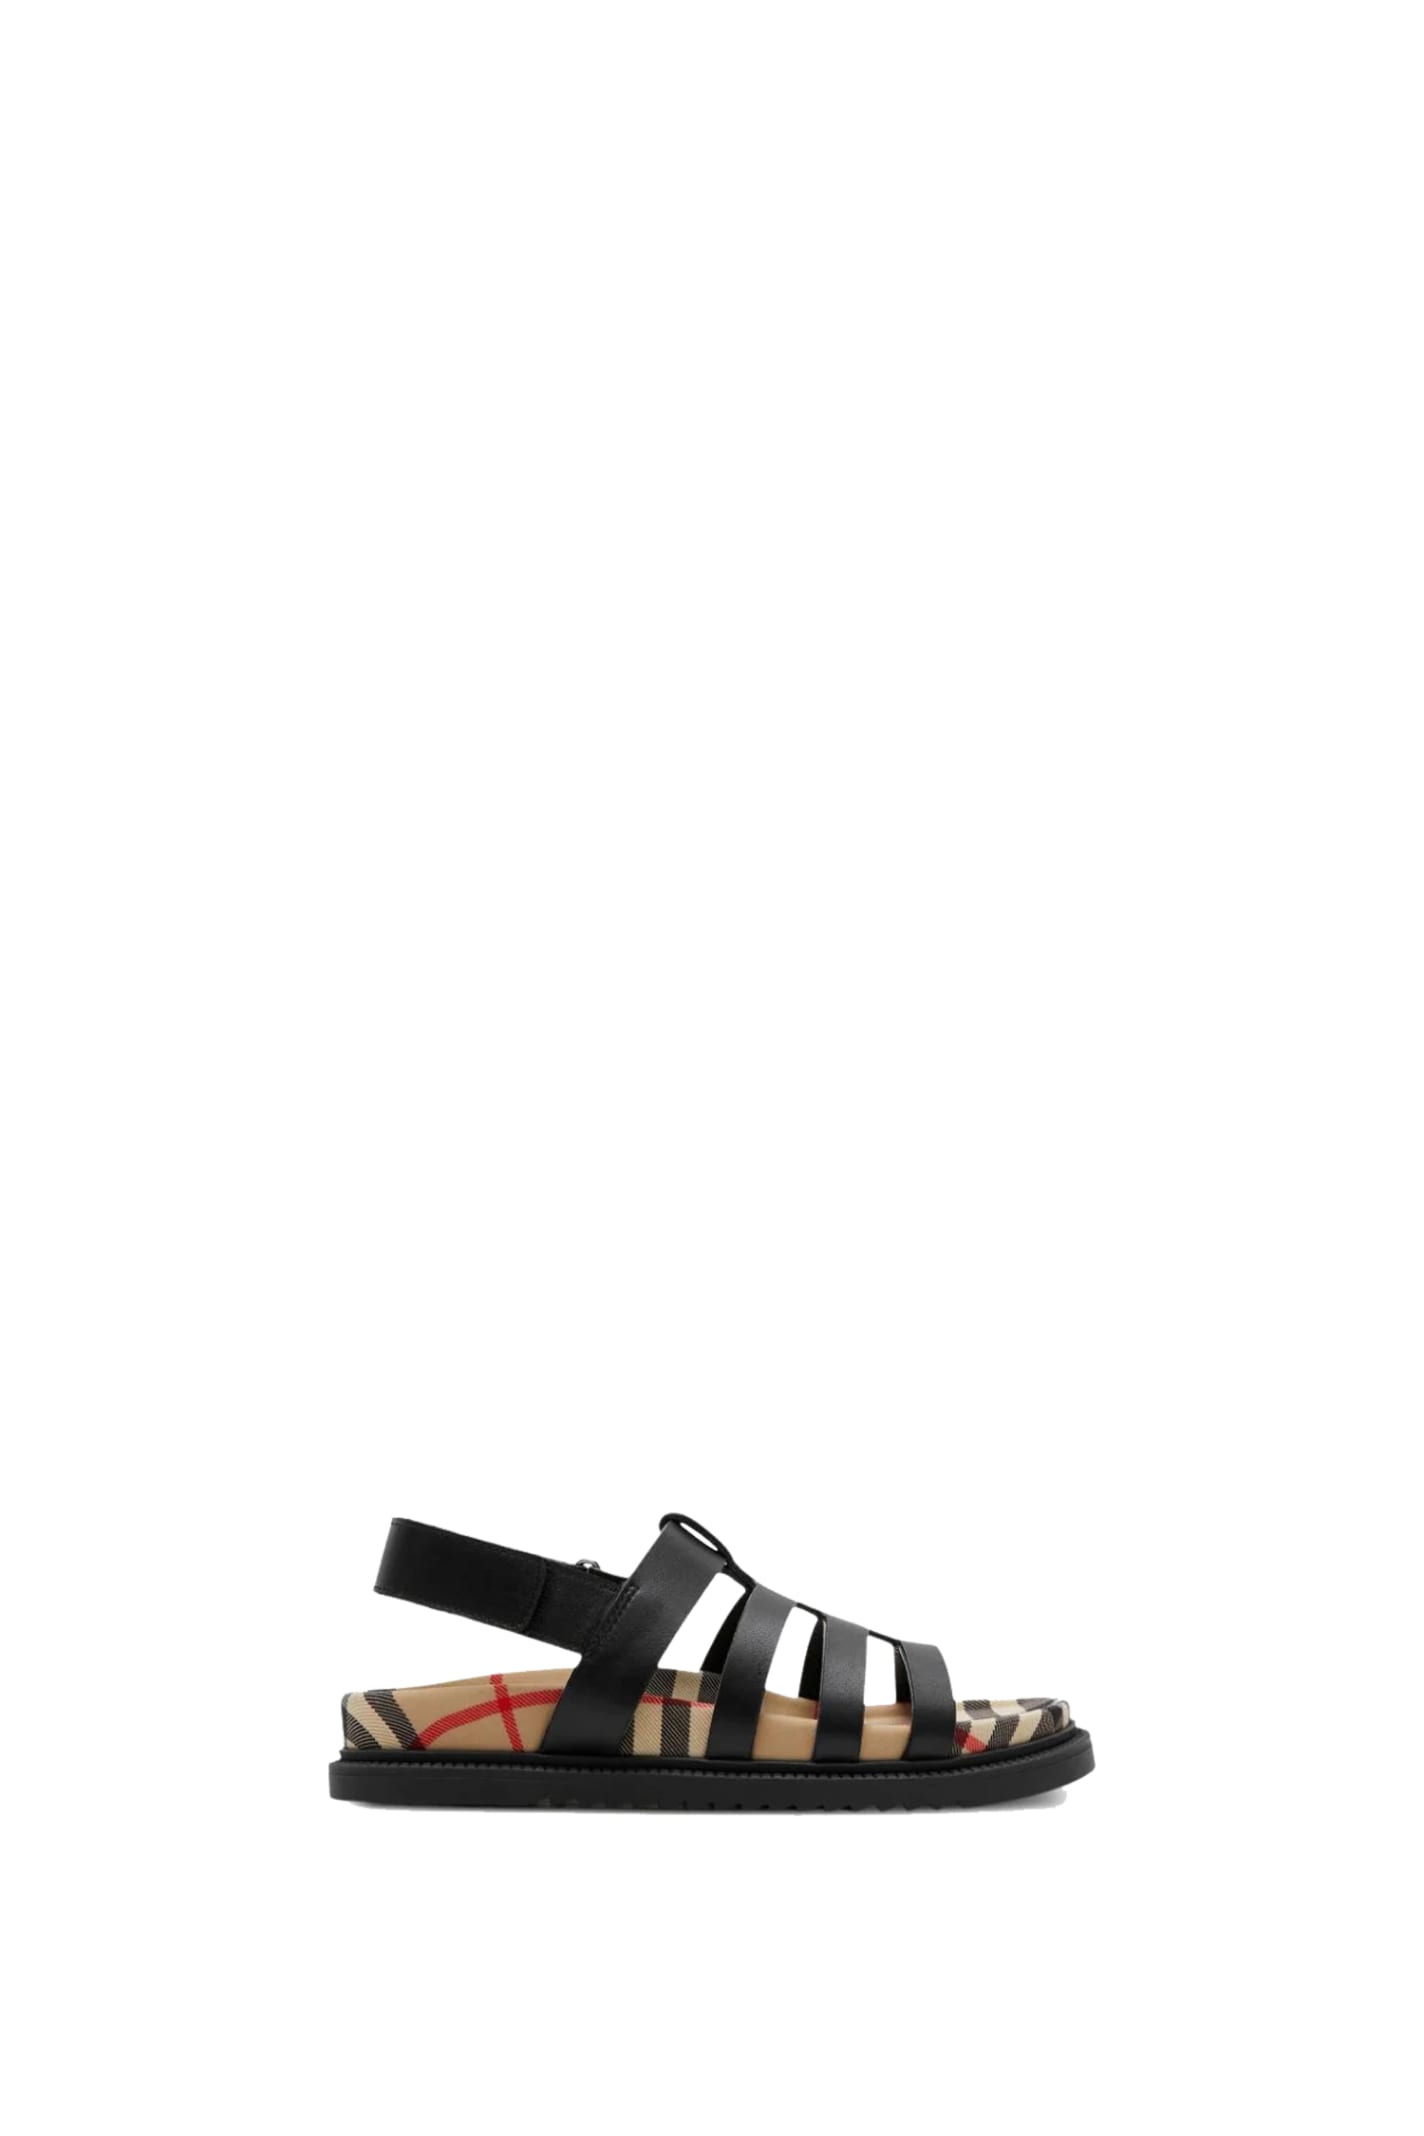 Burberry Leather Sandals